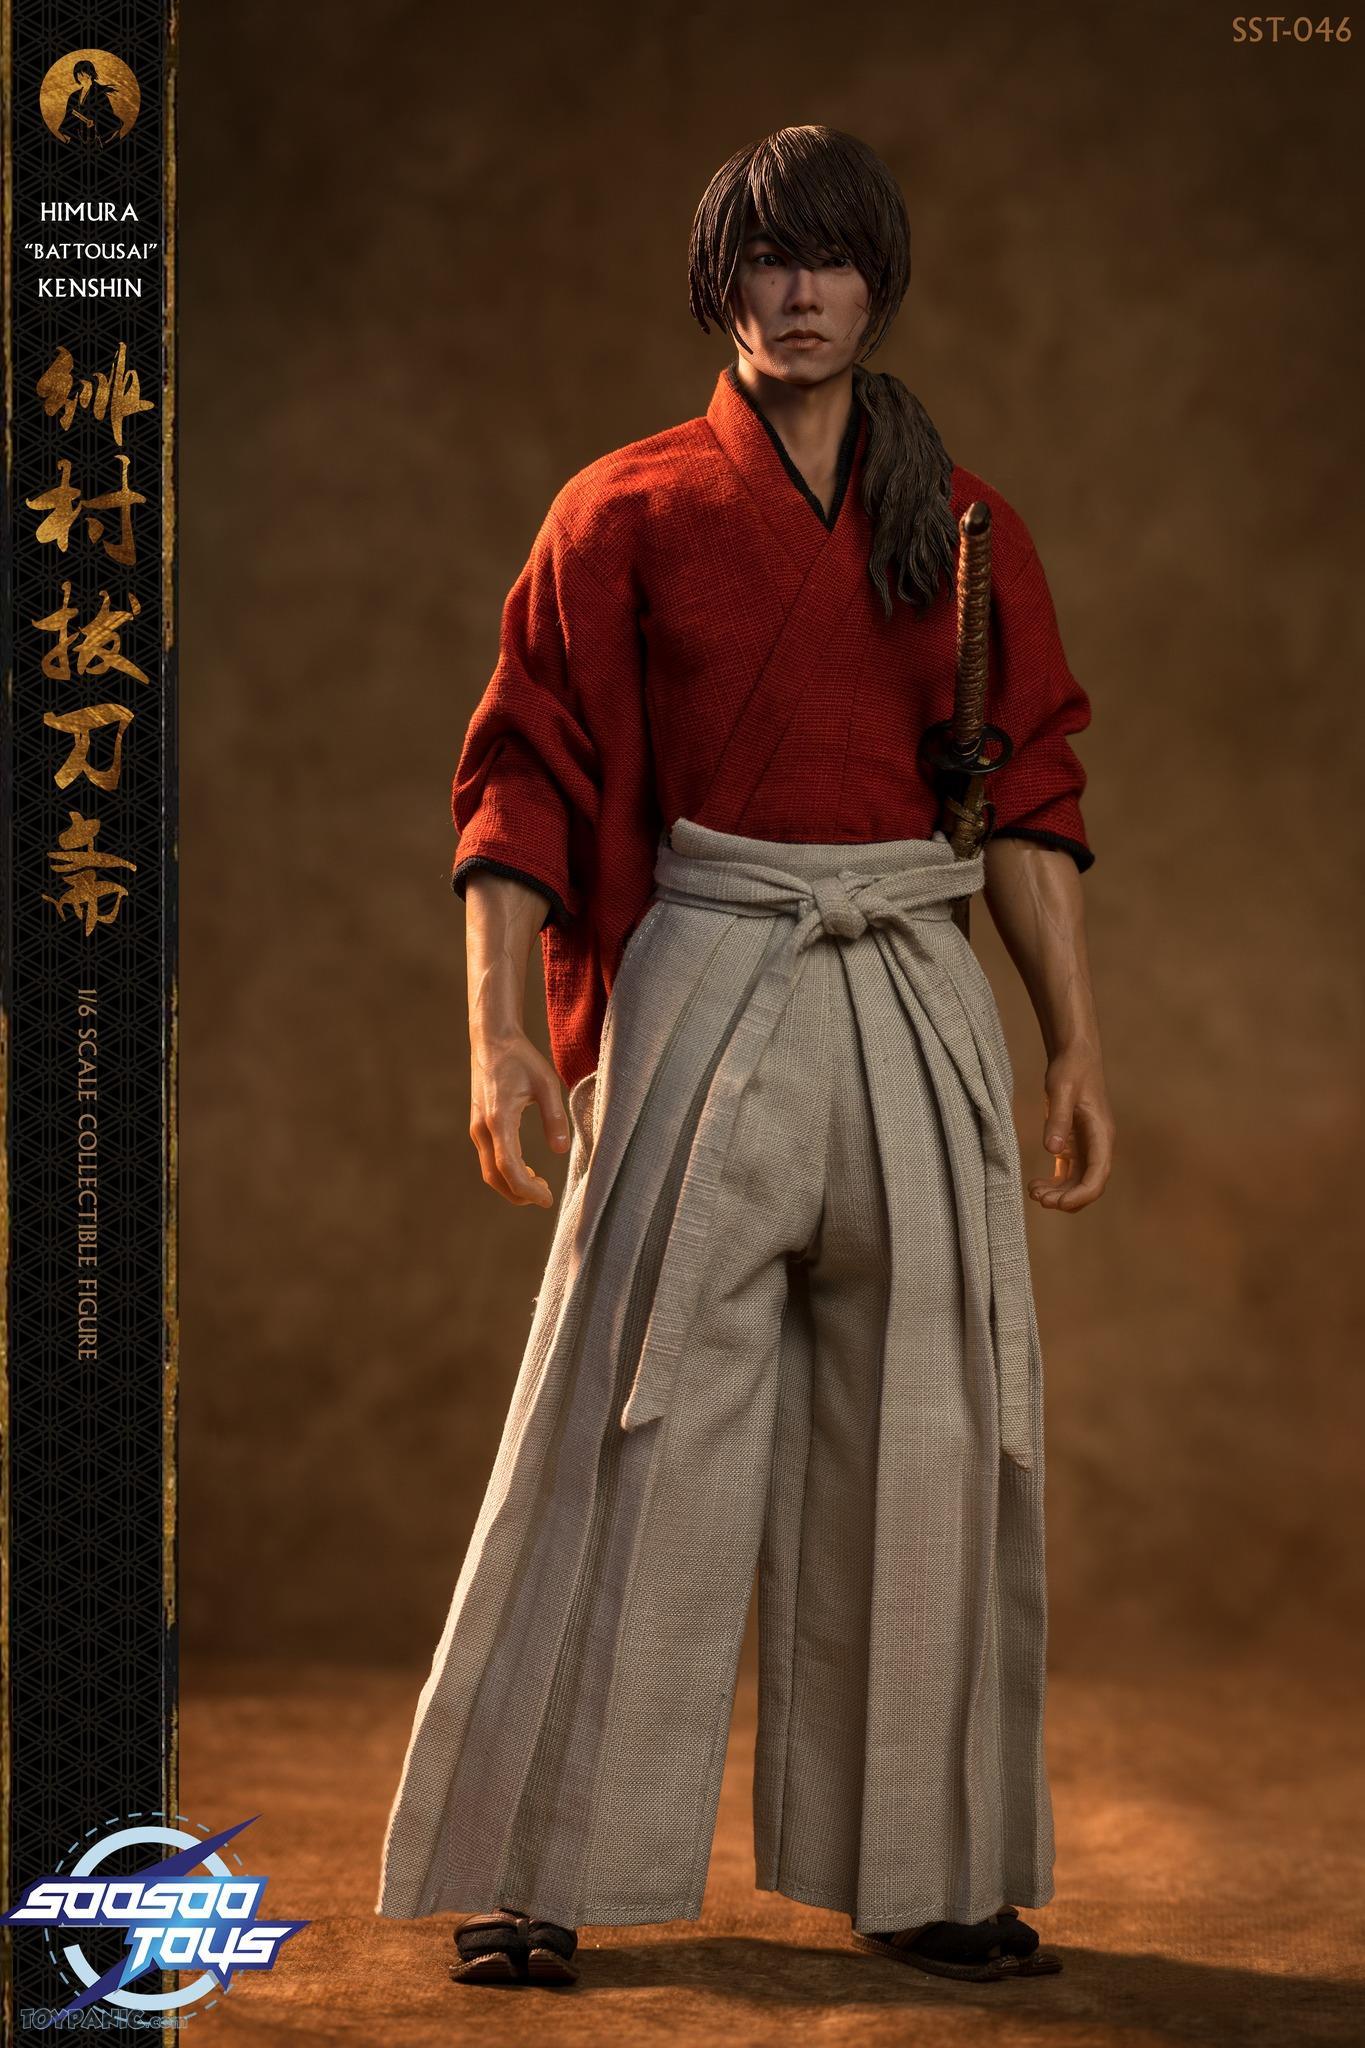 himura - NEW PRODUCT: 1/6 scale Rurouni Kenshin Collectible Figure from SooSooToys 712202251233PM_9426670